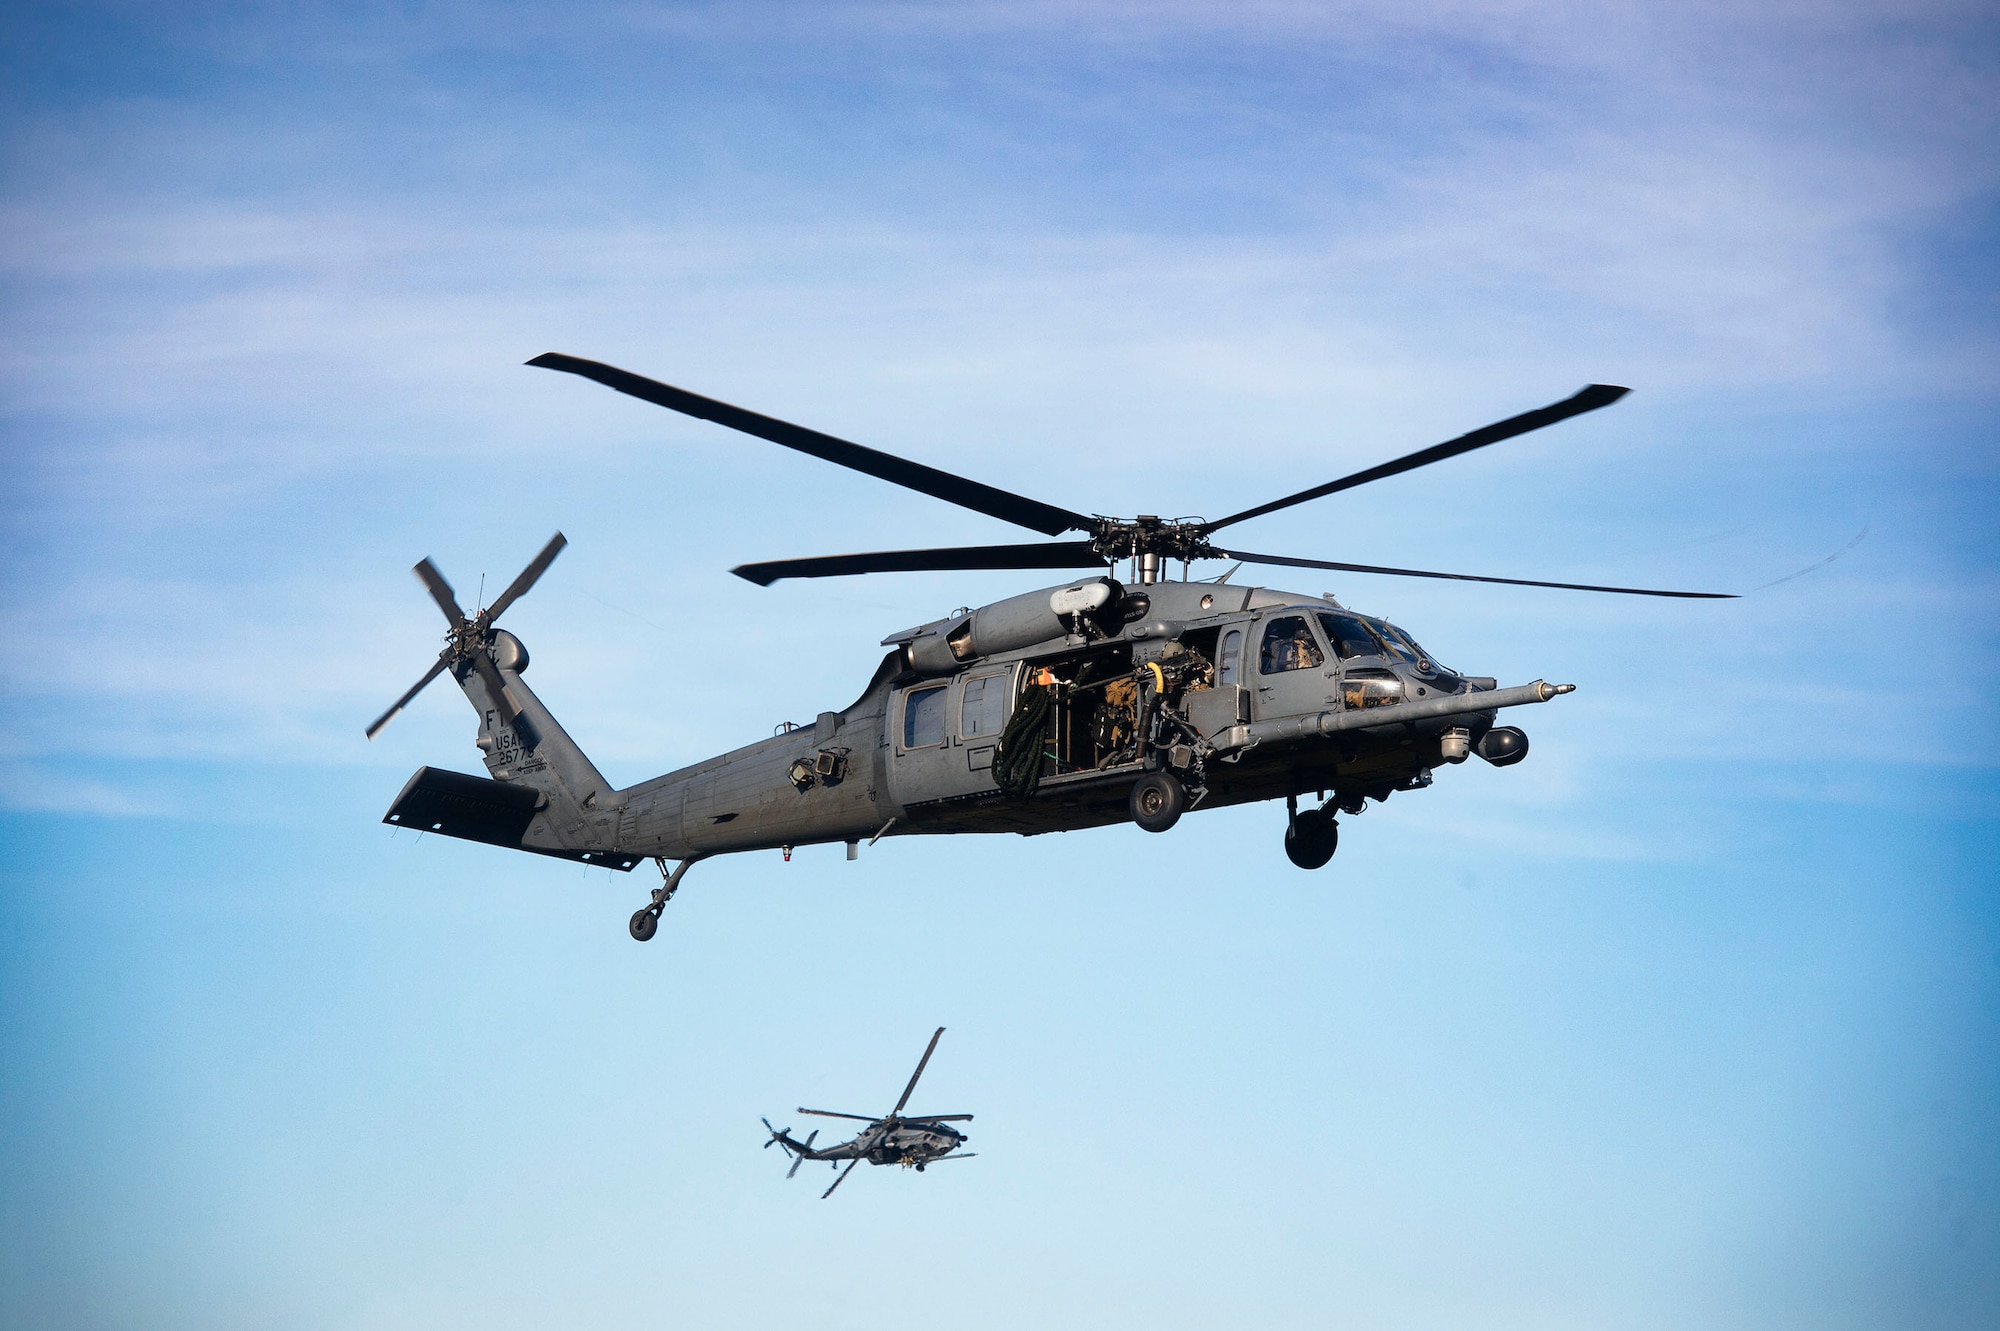 HH-60G Pave Hawks from the 41st Rescue Squadron (RQS) execute tactical maneuvers during a pre-deployment ‘spin-up’ exercise, Dec. 12, 2018, at Avon Park Air Force Range, Fla. During this pre-deployment ‘spin-up’ training, Moody’s 347th Rescue Group tested and maximized their combat search and rescue (CSAR) and personnel recovery capabilities. Under normal circumstances, the HH-60G Pave Hawk helicopter crews and maintainers deploy from Moody and integrate with Guardian Angel teams from different bases. This time, Moody’s 38th RQS and 41st RQS’s will deploy together and utilized this exercise to improve their mission readiness and cohesion before their departure. (U.S. Air Force photo by Senior Airman Greg Nash)